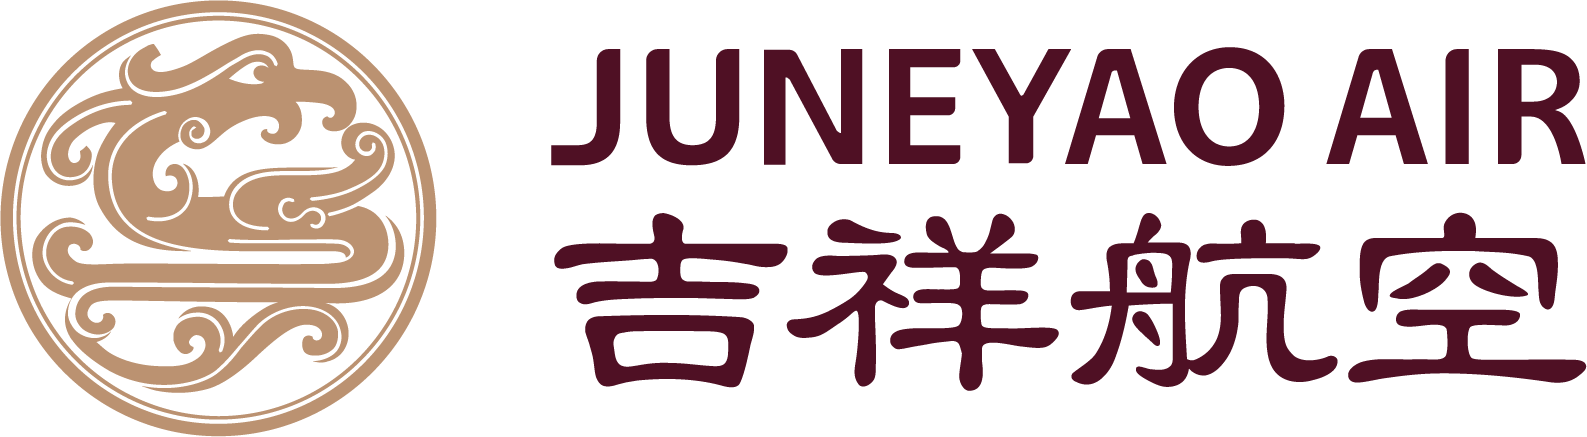 Juneyao Airlines Logo png